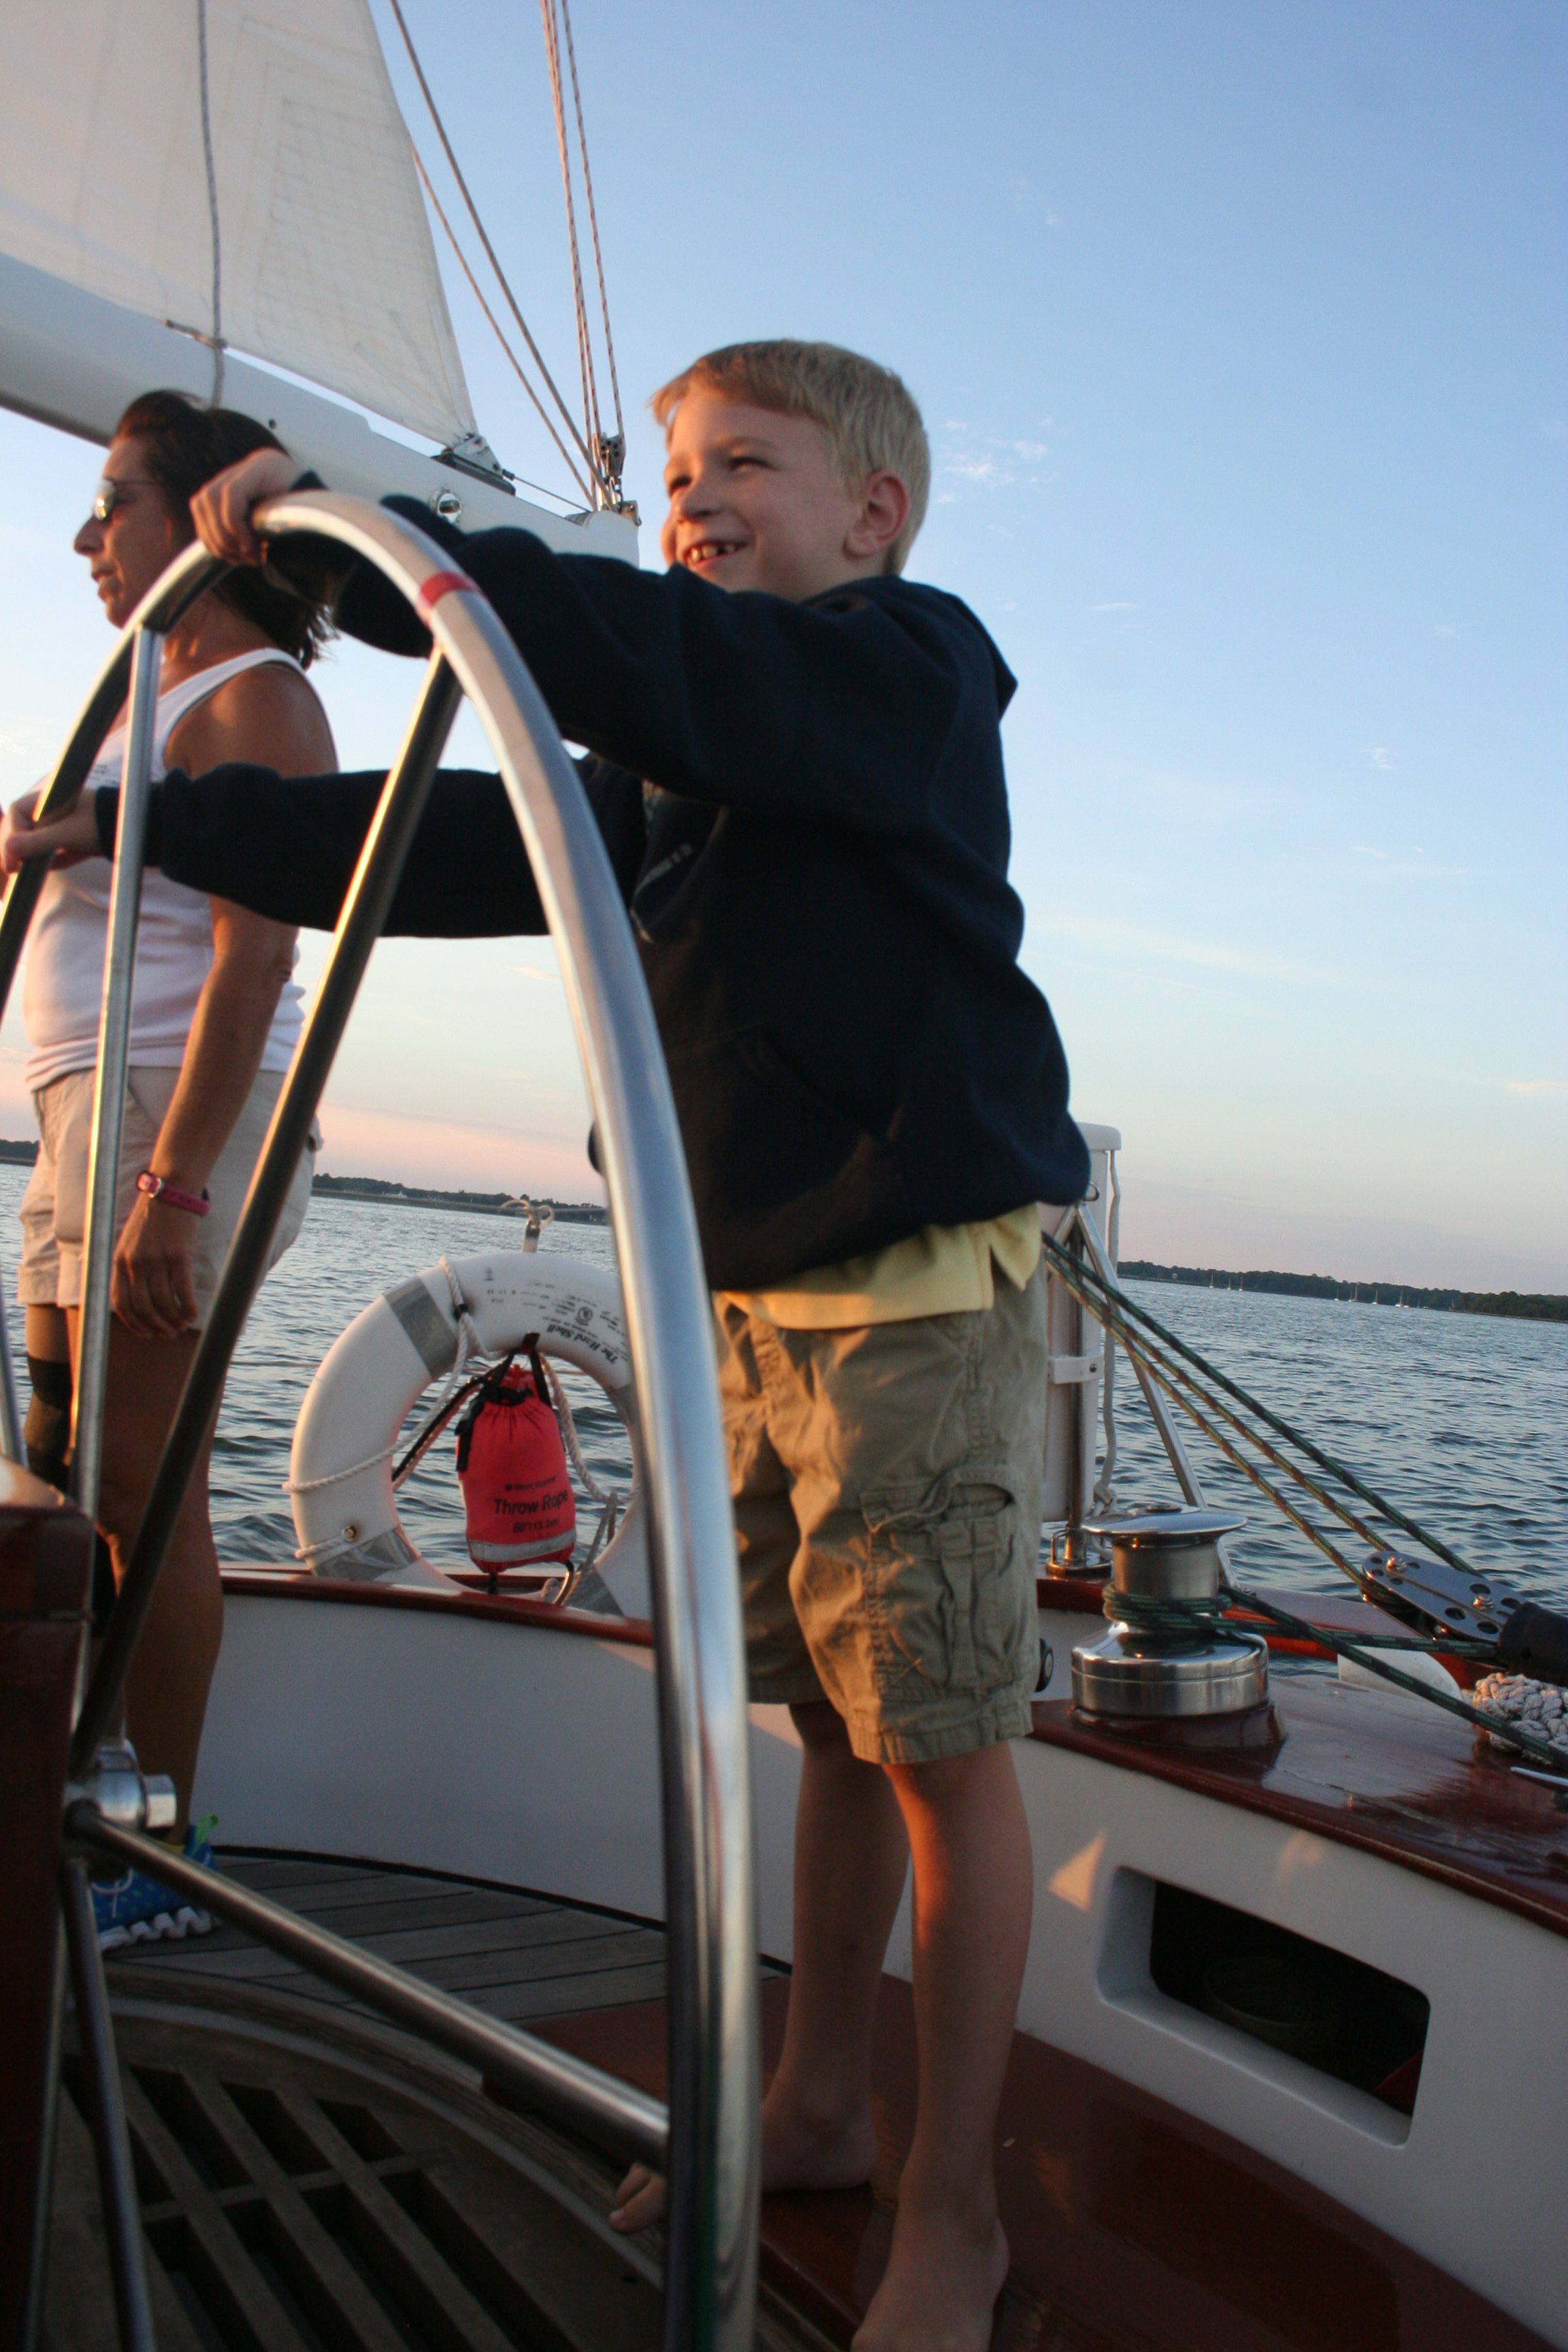 Young boy steering the schooner with captain supervision